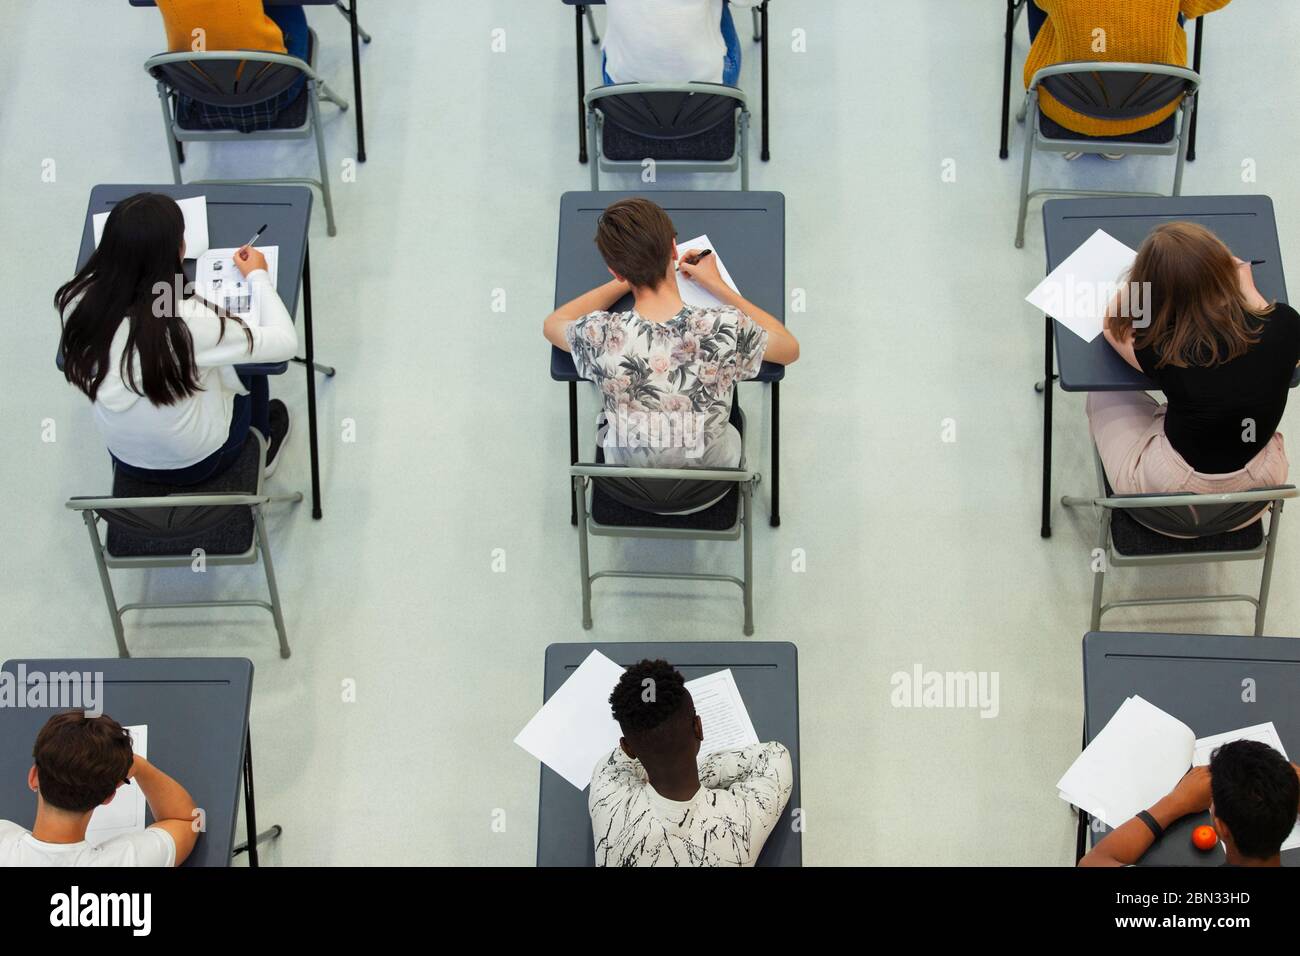 Overhead view high school students taking exam at desks in classroom Stock Photo